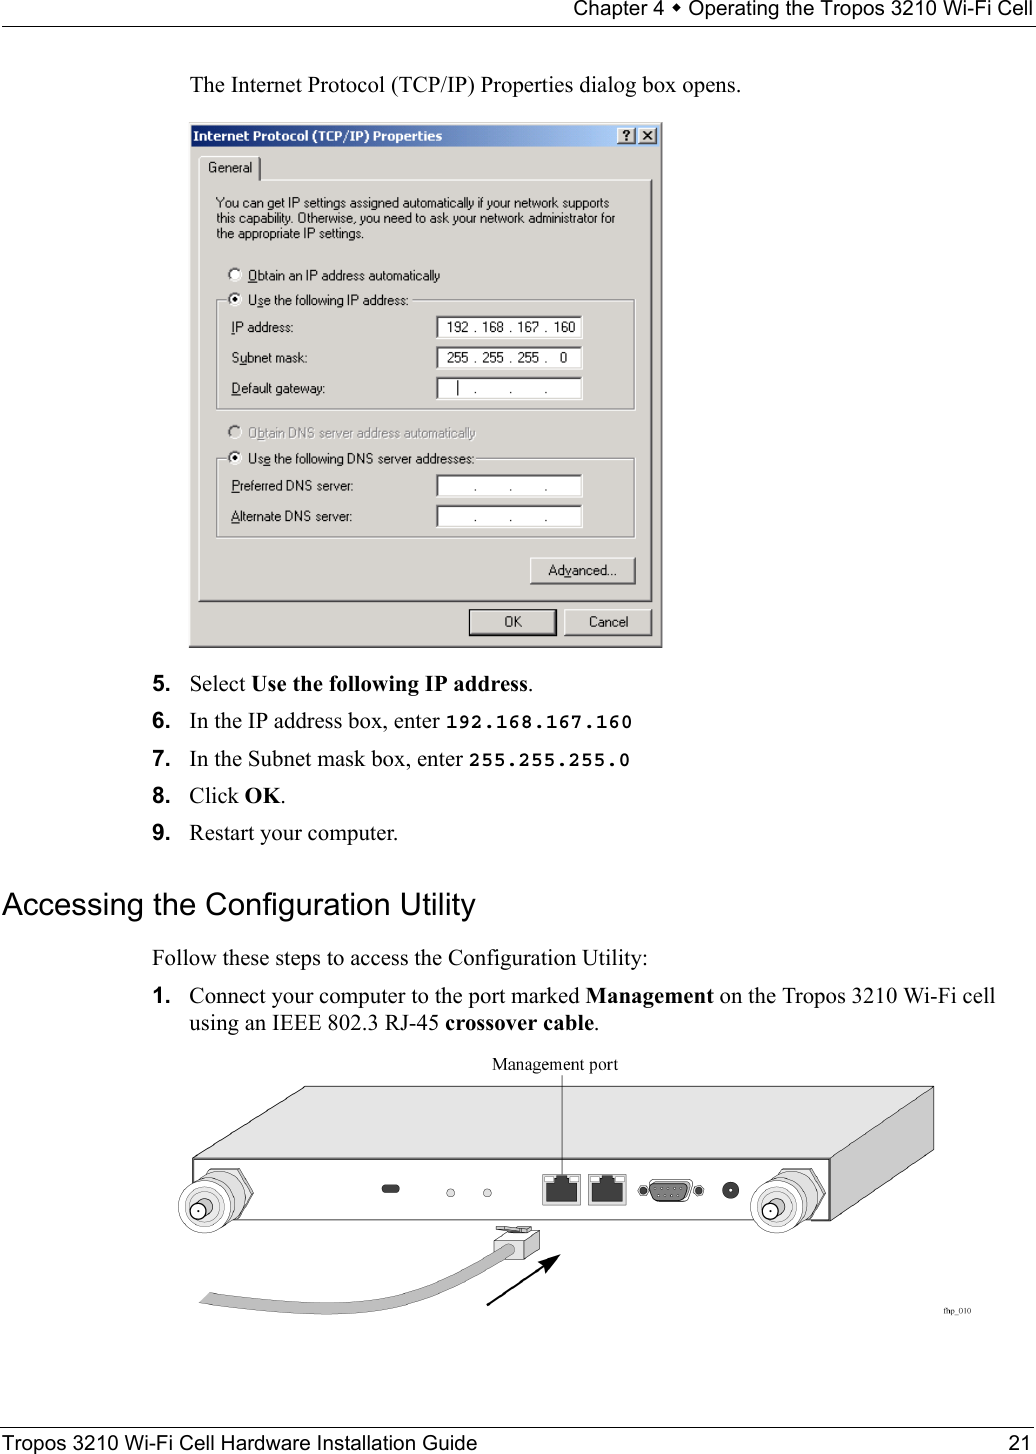 Chapter 4  Operating the Tropos 3210 Wi-Fi CellTropos 3210 Wi-Fi Cell Hardware Installation Guide 21The Internet Protocol (TCP/IP) Properties dialog box opens.5. Select Use the following IP address.6. In the IP address box, enter 192.168.167.1607. In the Subnet mask box, enter 255.255.255.08. Click OK.9. Restart your computer.Accessing the Configuration Utility Follow these steps to access the Configuration Utility:1. Connect your computer to the port marked Management on the Tropos 3210 Wi-Fi cell using an IEEE 802.3 RJ-45 crossover cable.